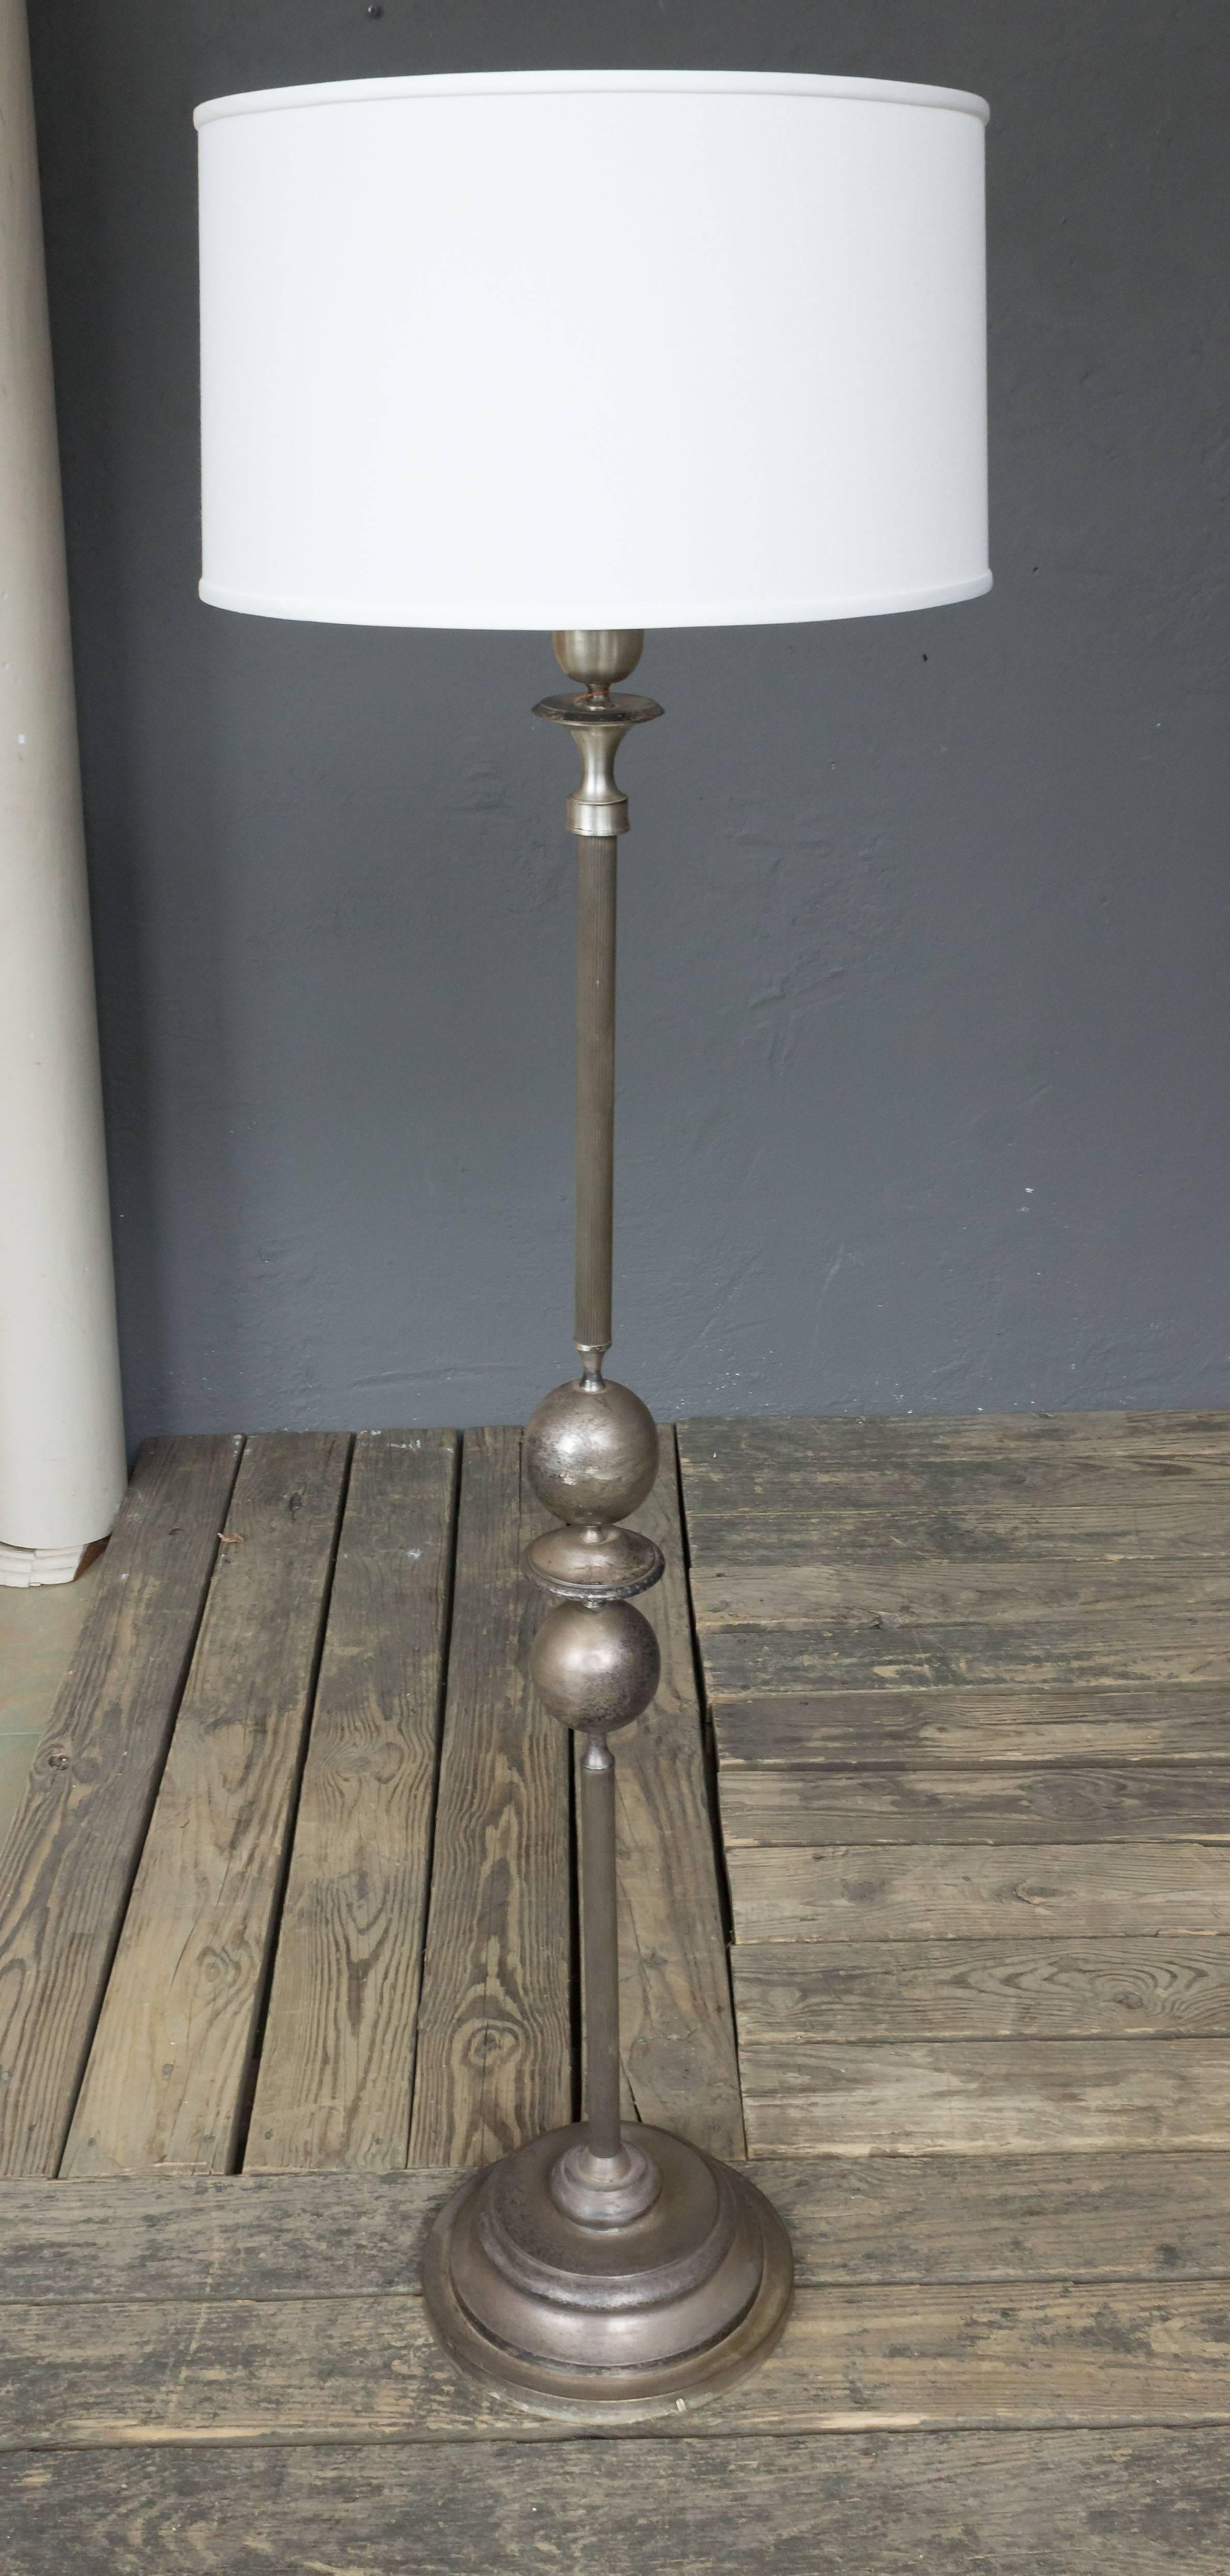 An unusual modernist floor lamp made of silvered brass and metal components having a series of spheres and discs joining the fluted stems. The floor lamp is supported on a stepped circular base. French, 1960s.

Price includes polishing or plating